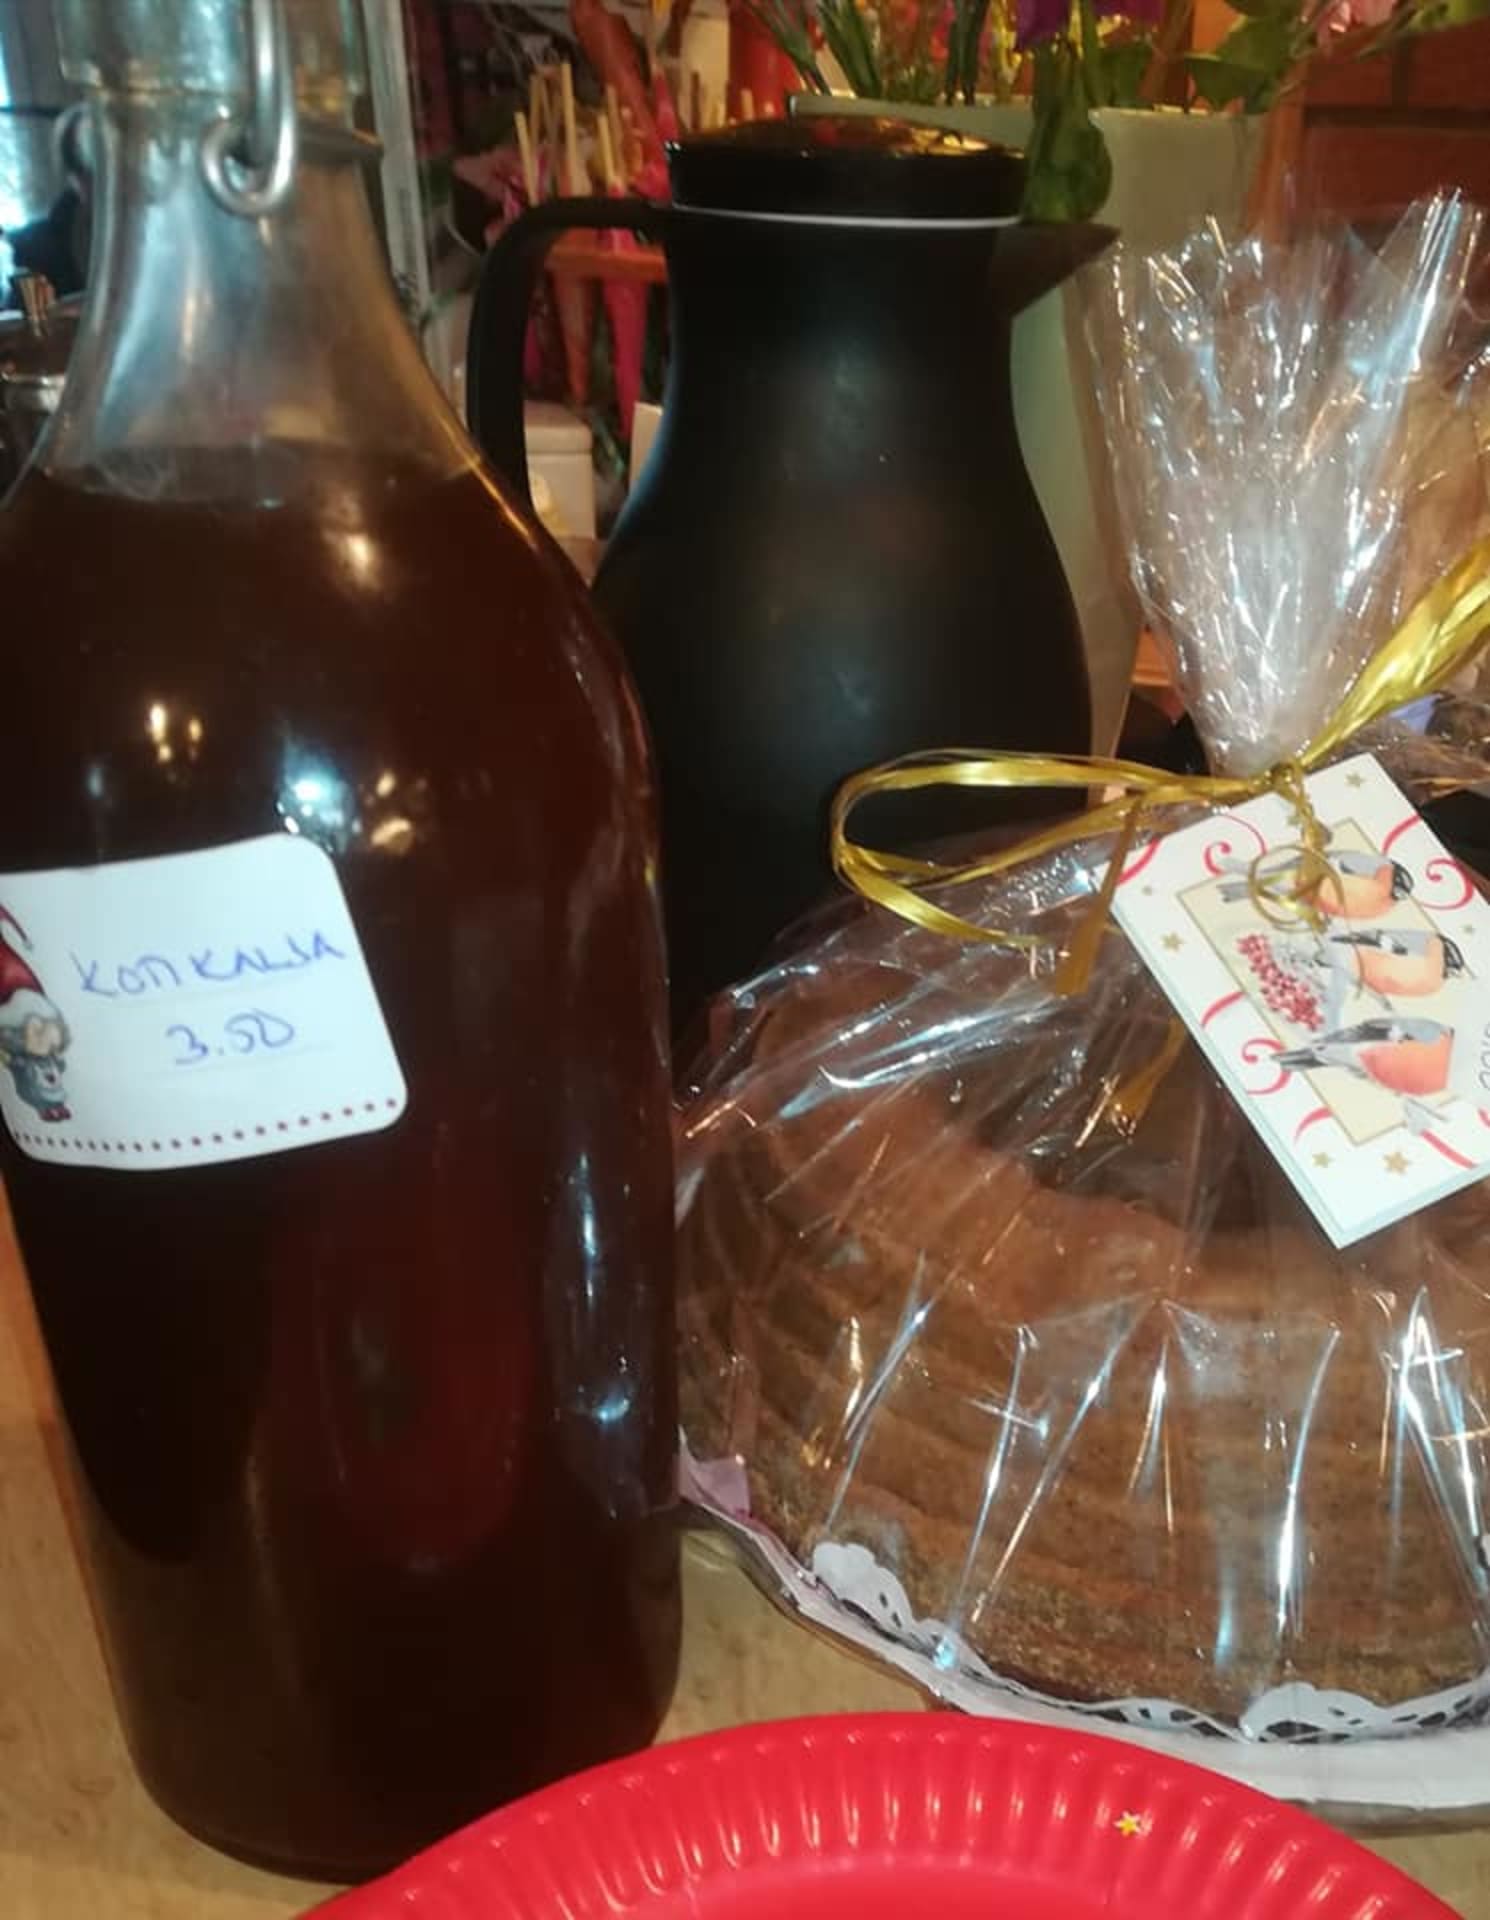 Home-made beer and cakes.